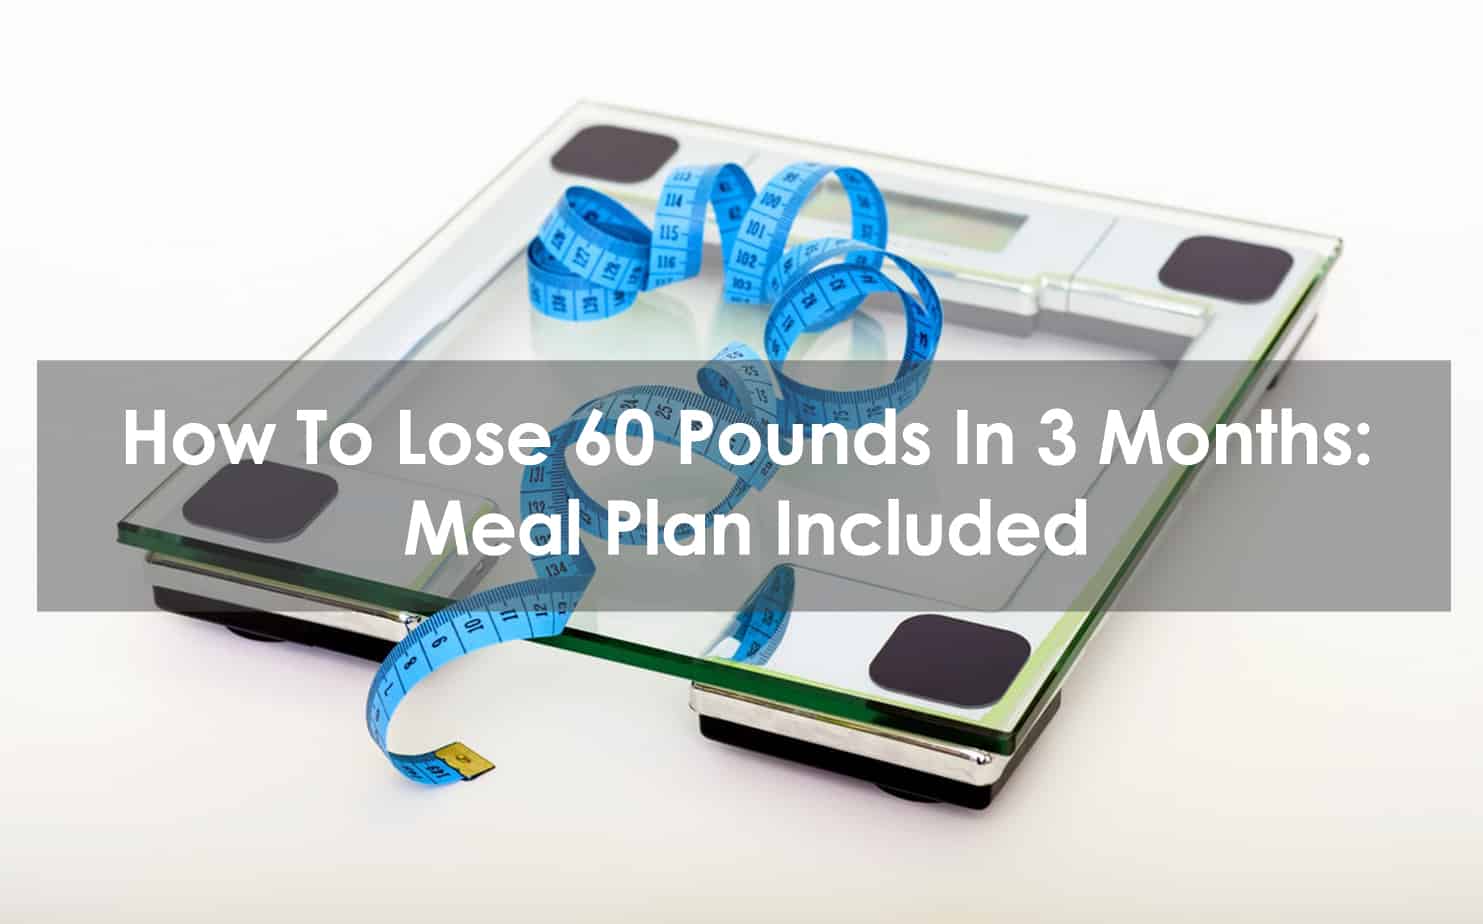 How To Lose 60 Pounds In 3 Months: Meal Plan Included